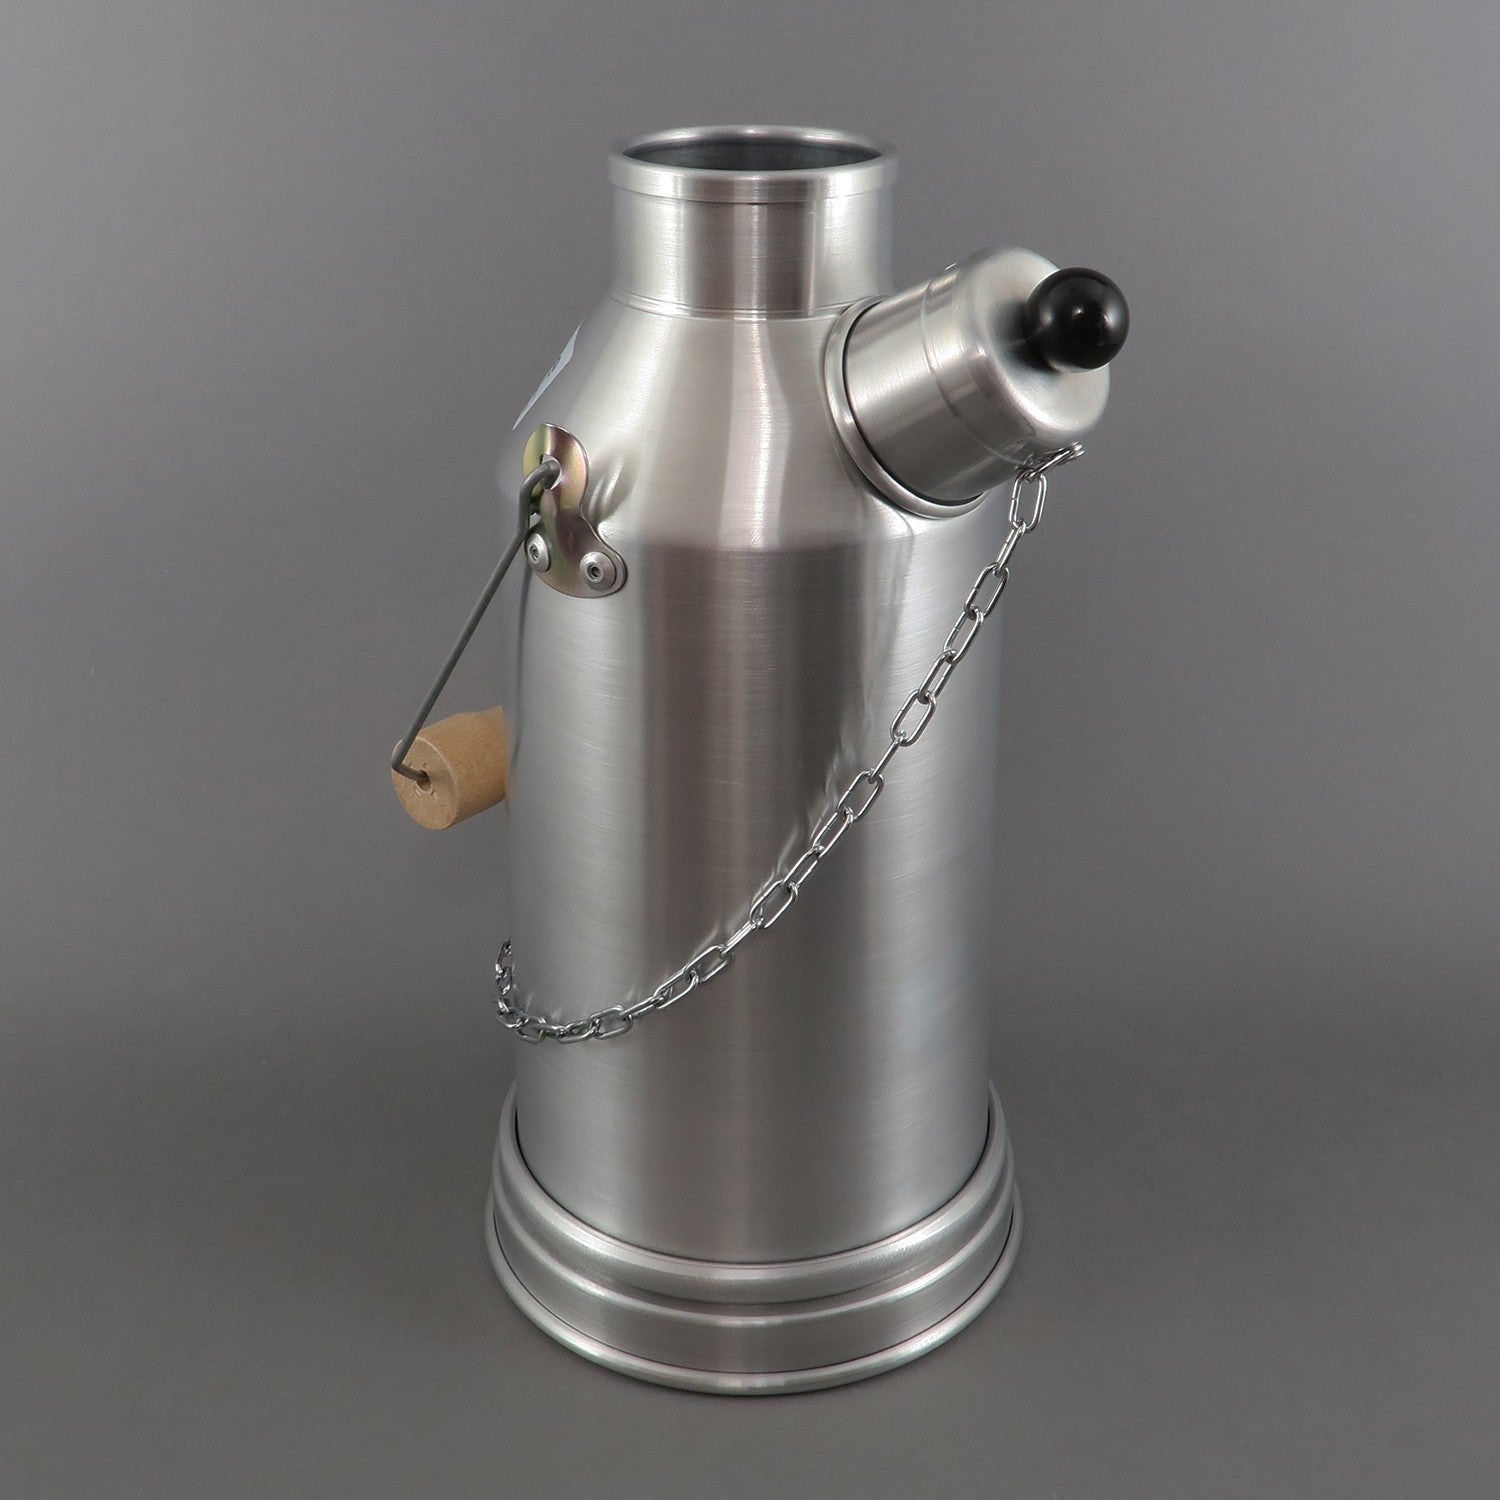 Ghillie Silver Anodised Camping Kettle